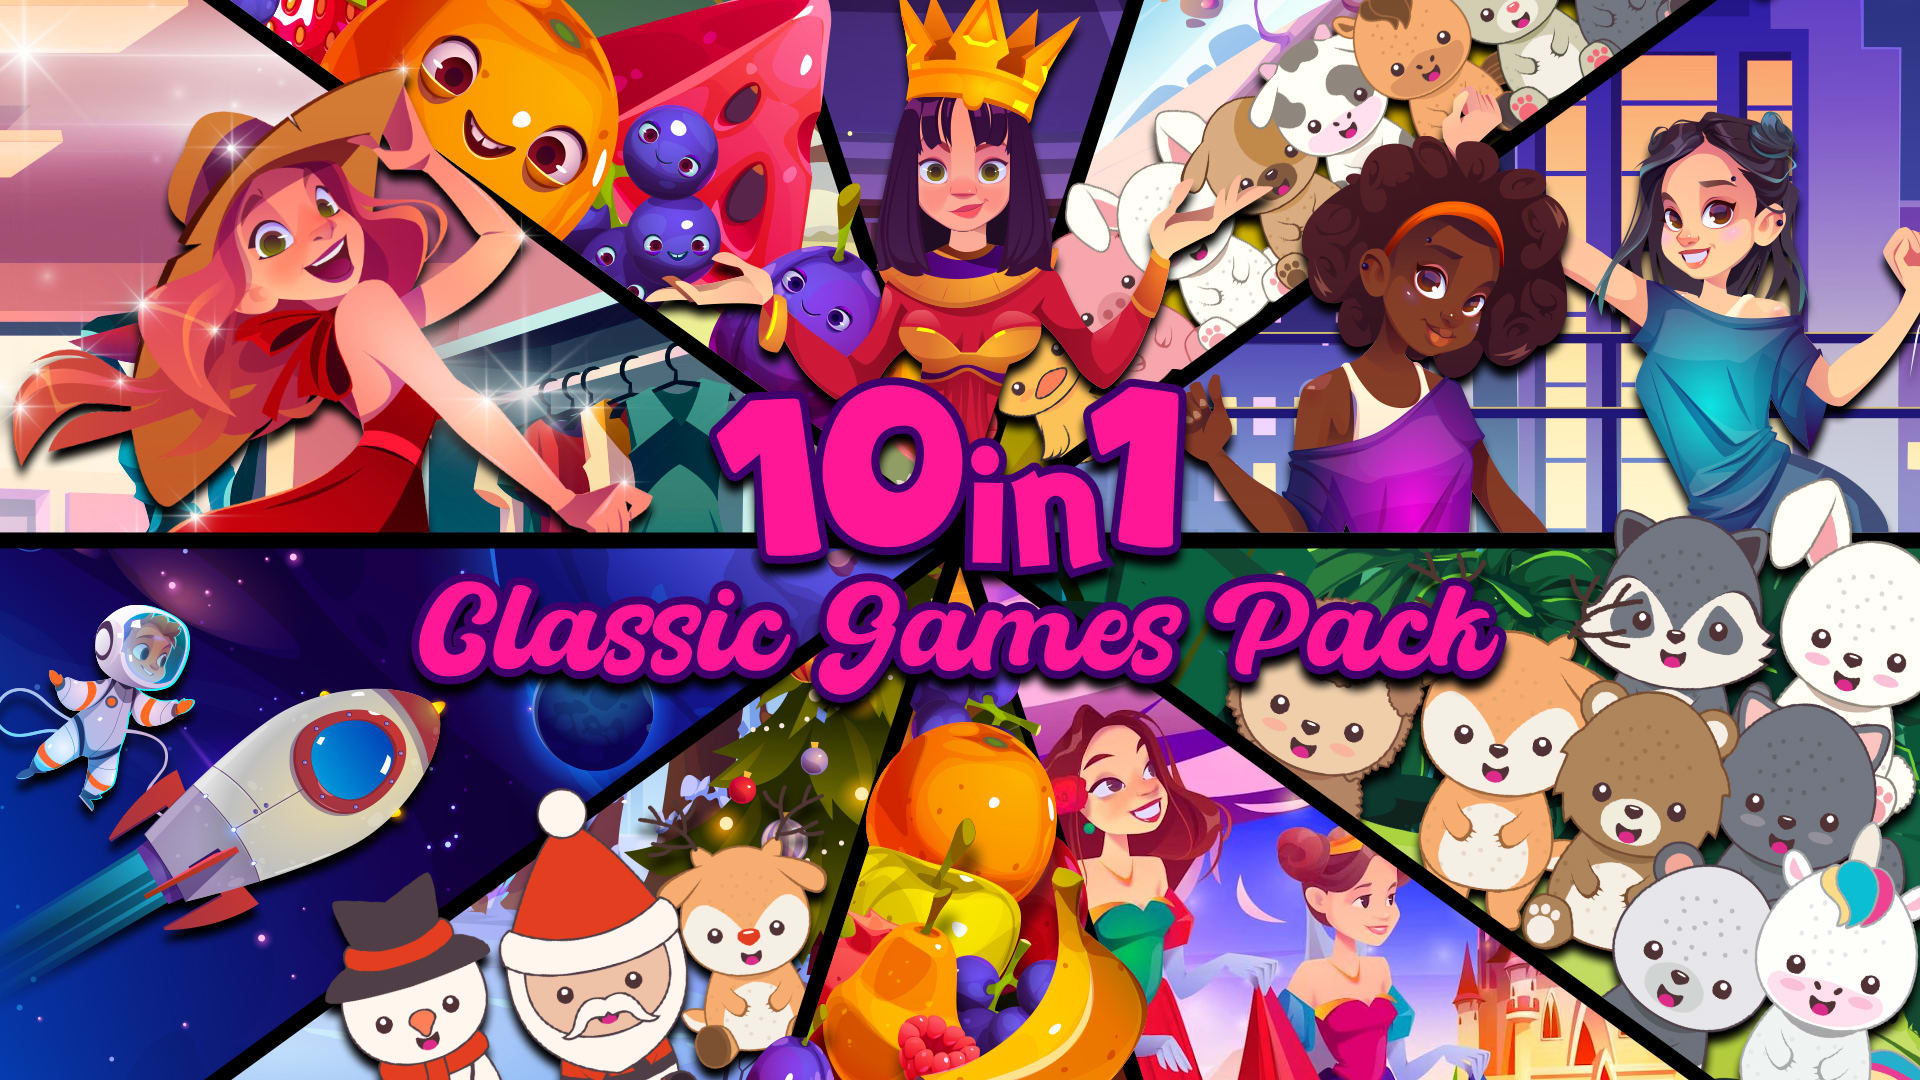 10 in 1 Classic Games Pack 1